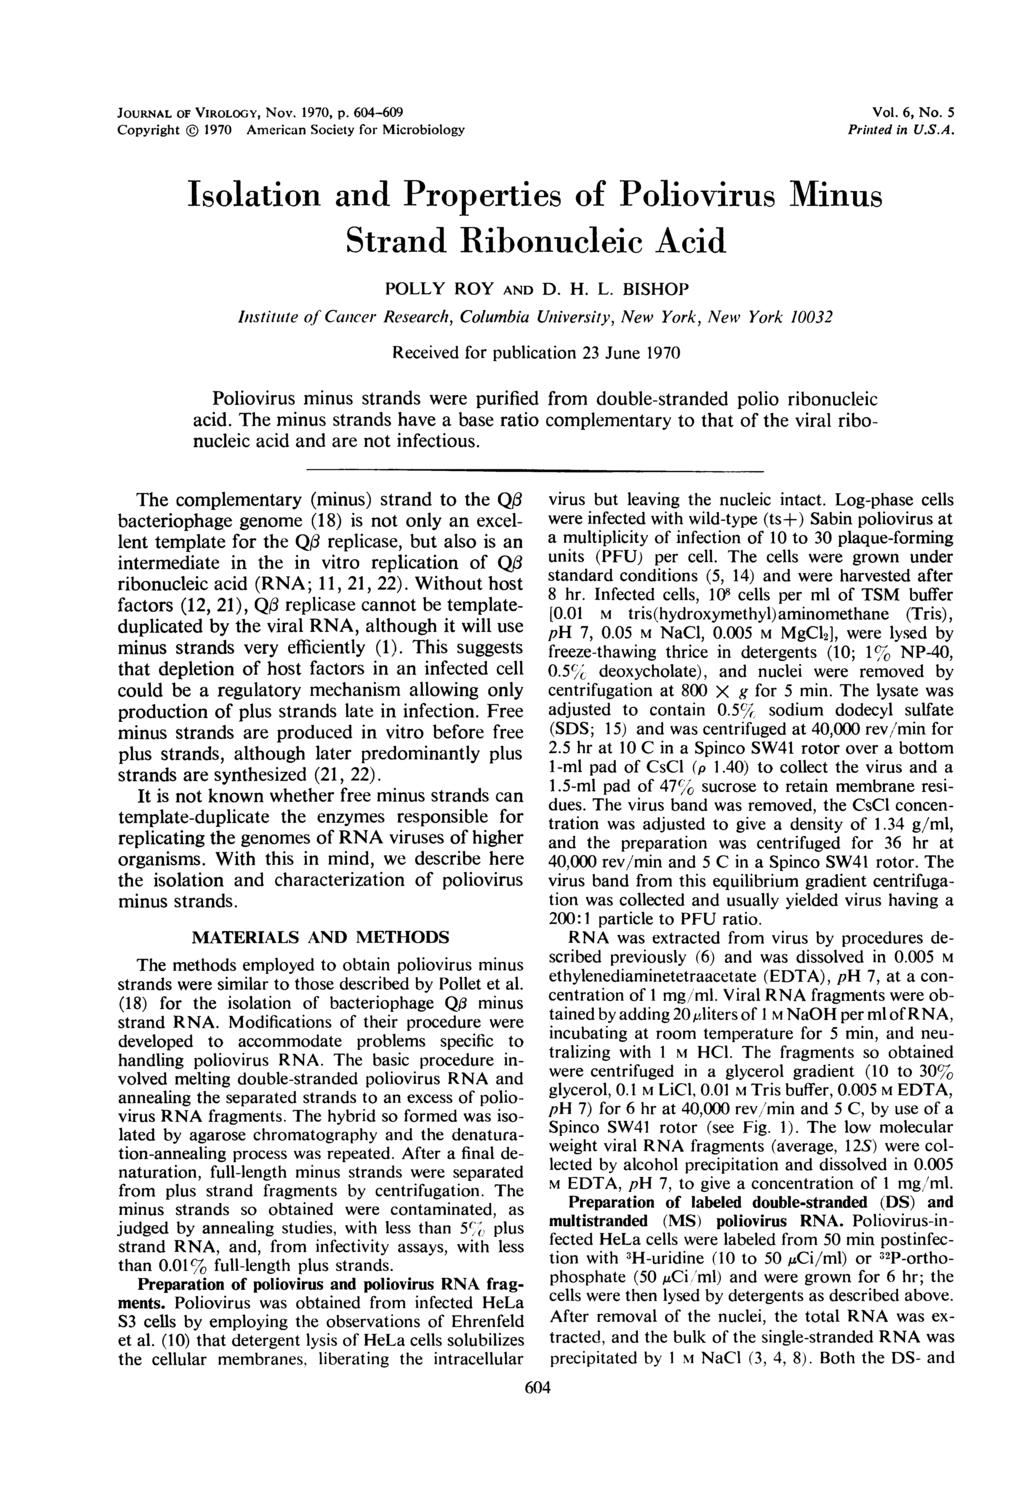 JOURNAL OF VIROLOGY, Nov. 197, p. 64-69 Copyright ( 197 American Society for Microbiology Vol. 6, No. 5 Prinzted in U.S.A. Isolation and Properties of Poliovirus Minus Strand Ribonucleic Acid POLLY ROY AND D.